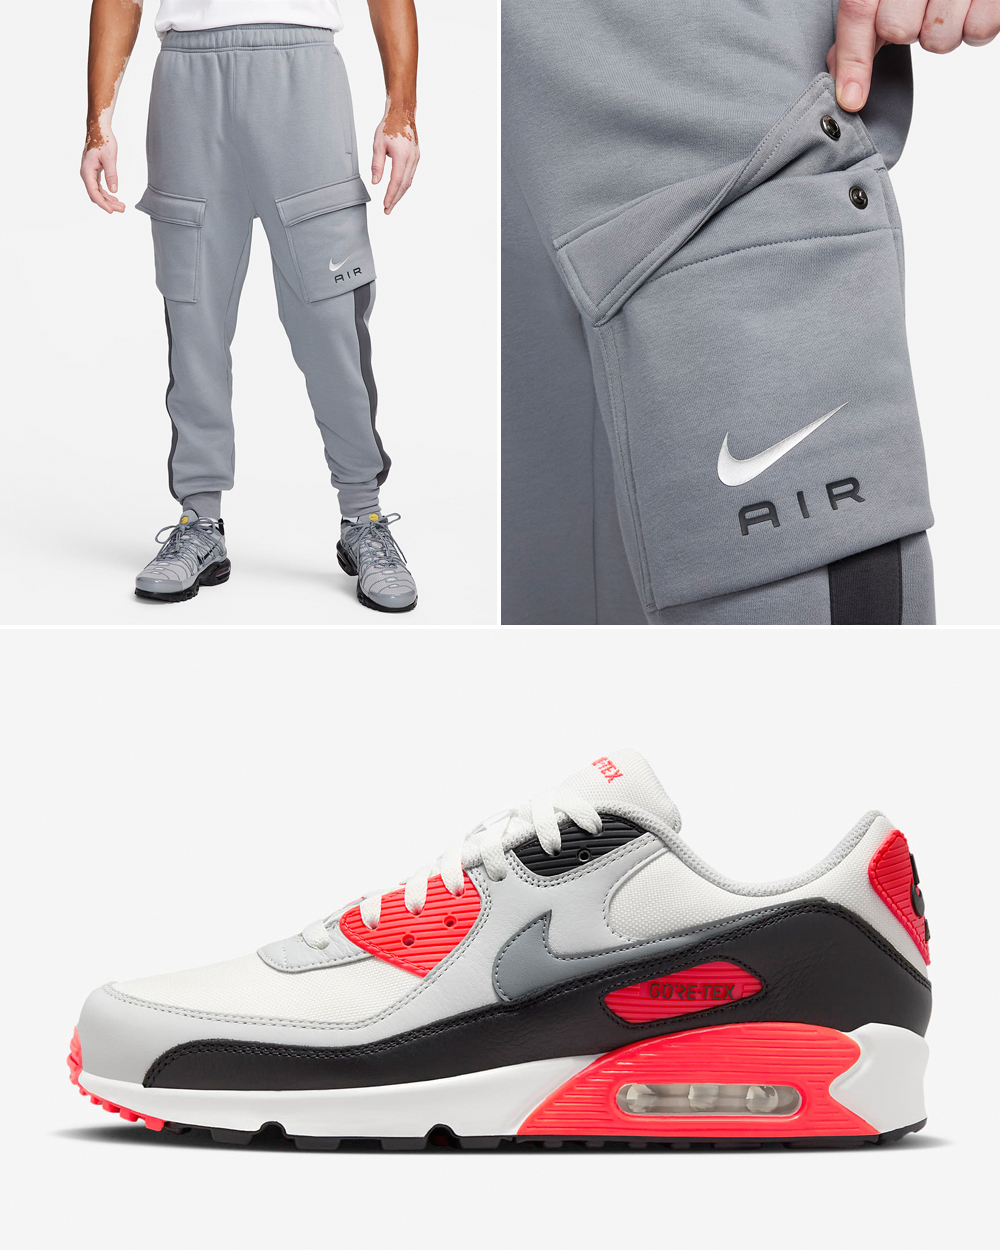 Nike Air Max 90 Gore Tex Infrared Pants Matching Outfit